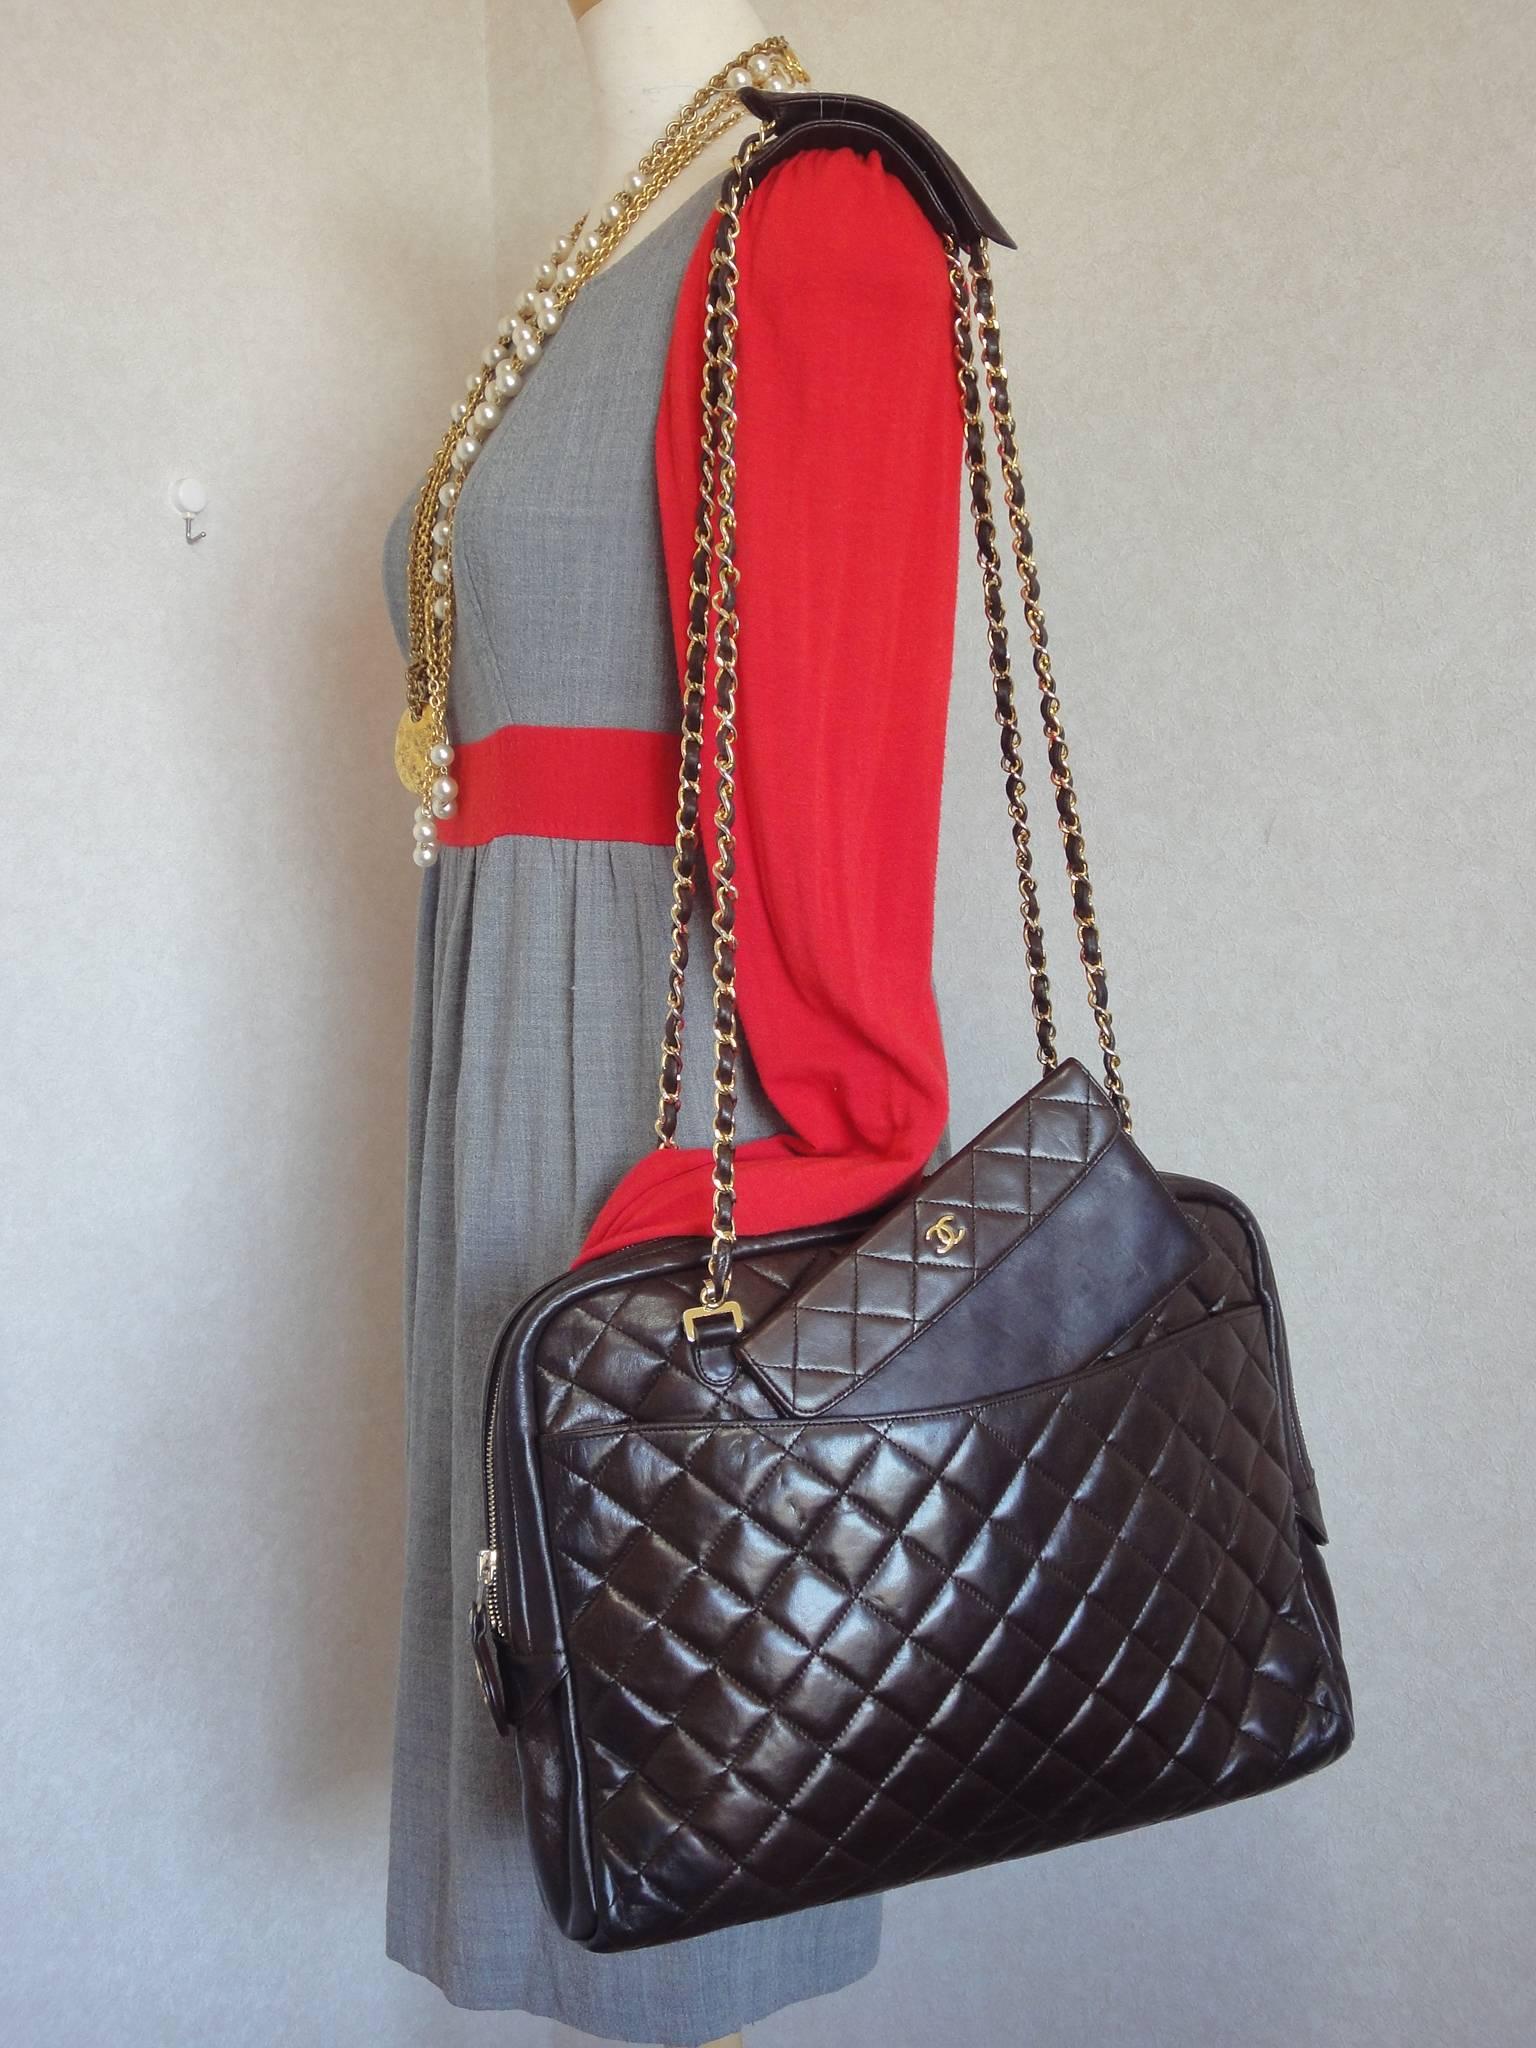 1980s Vintage CHANEL dark brown lambskin large classic bag with a mini pouch 3